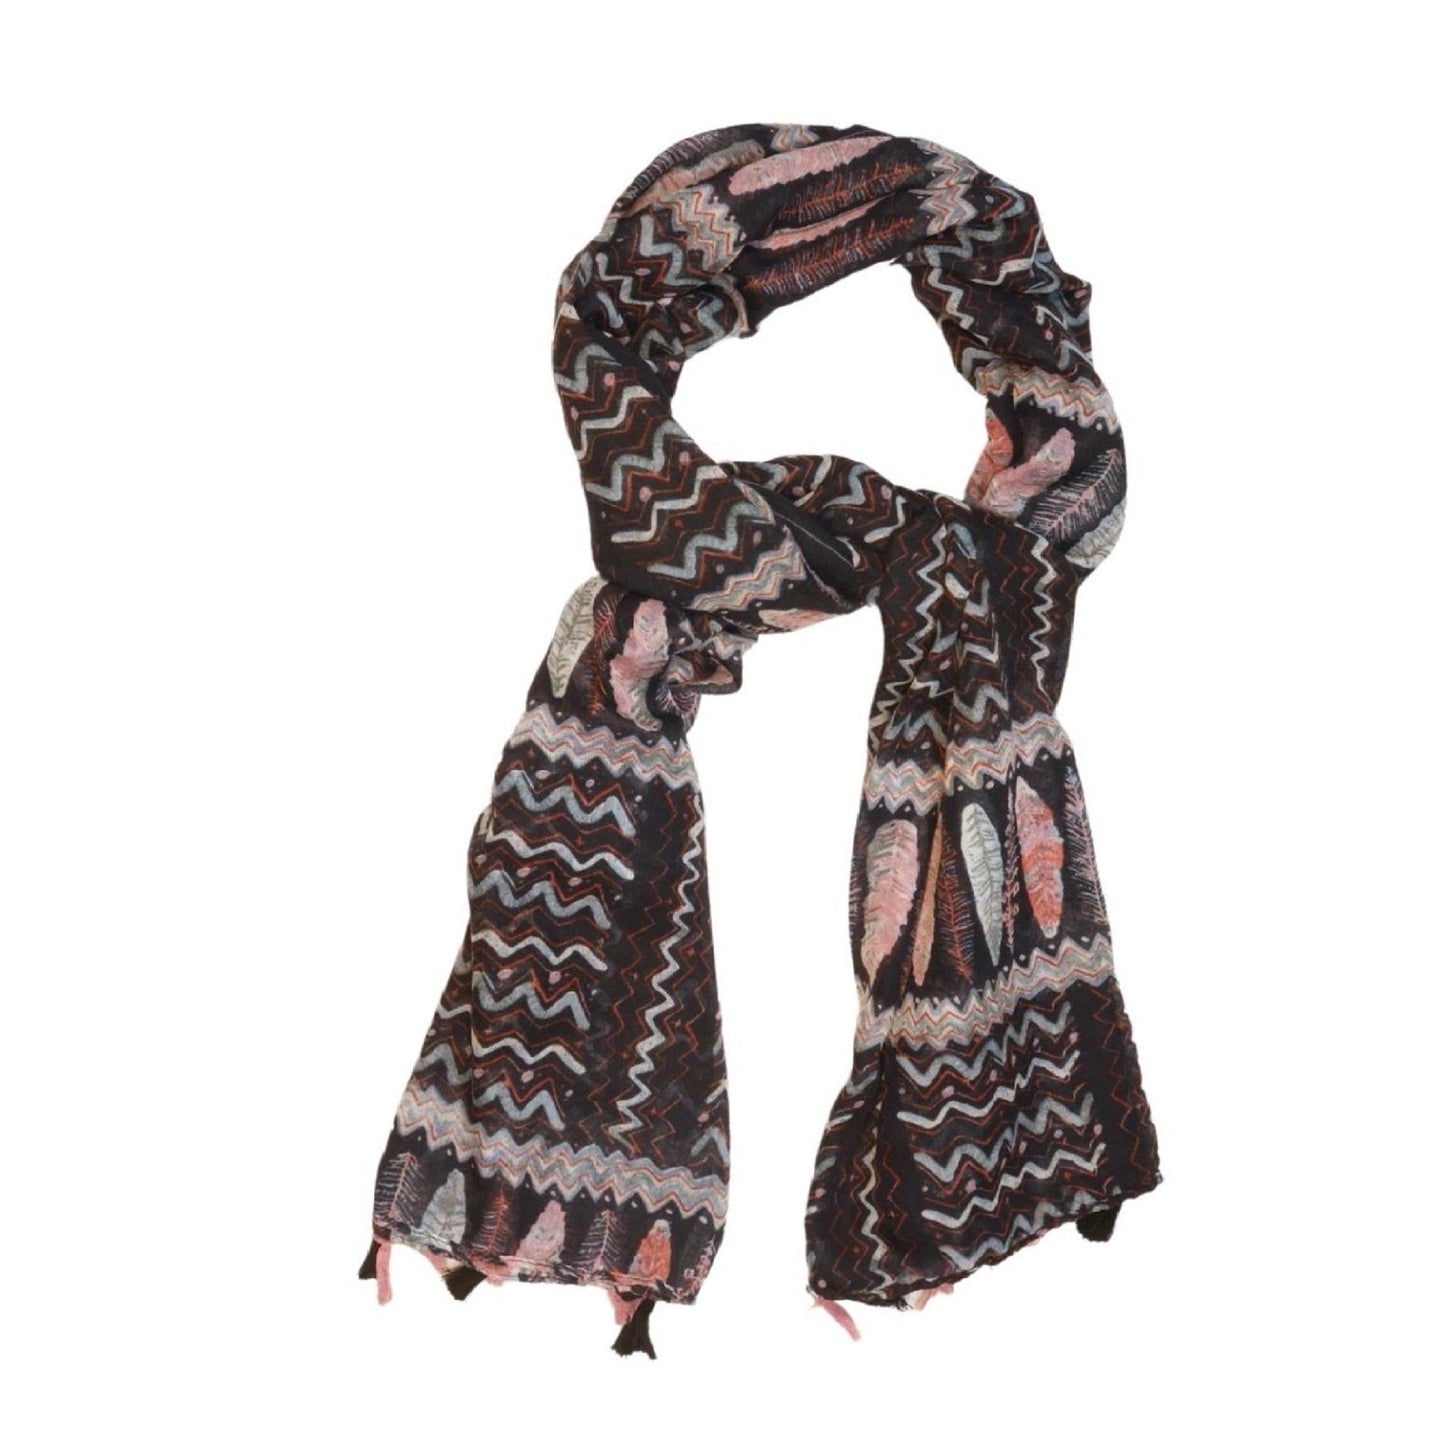 Black with Pink Feathers Scarf - only 1 left!